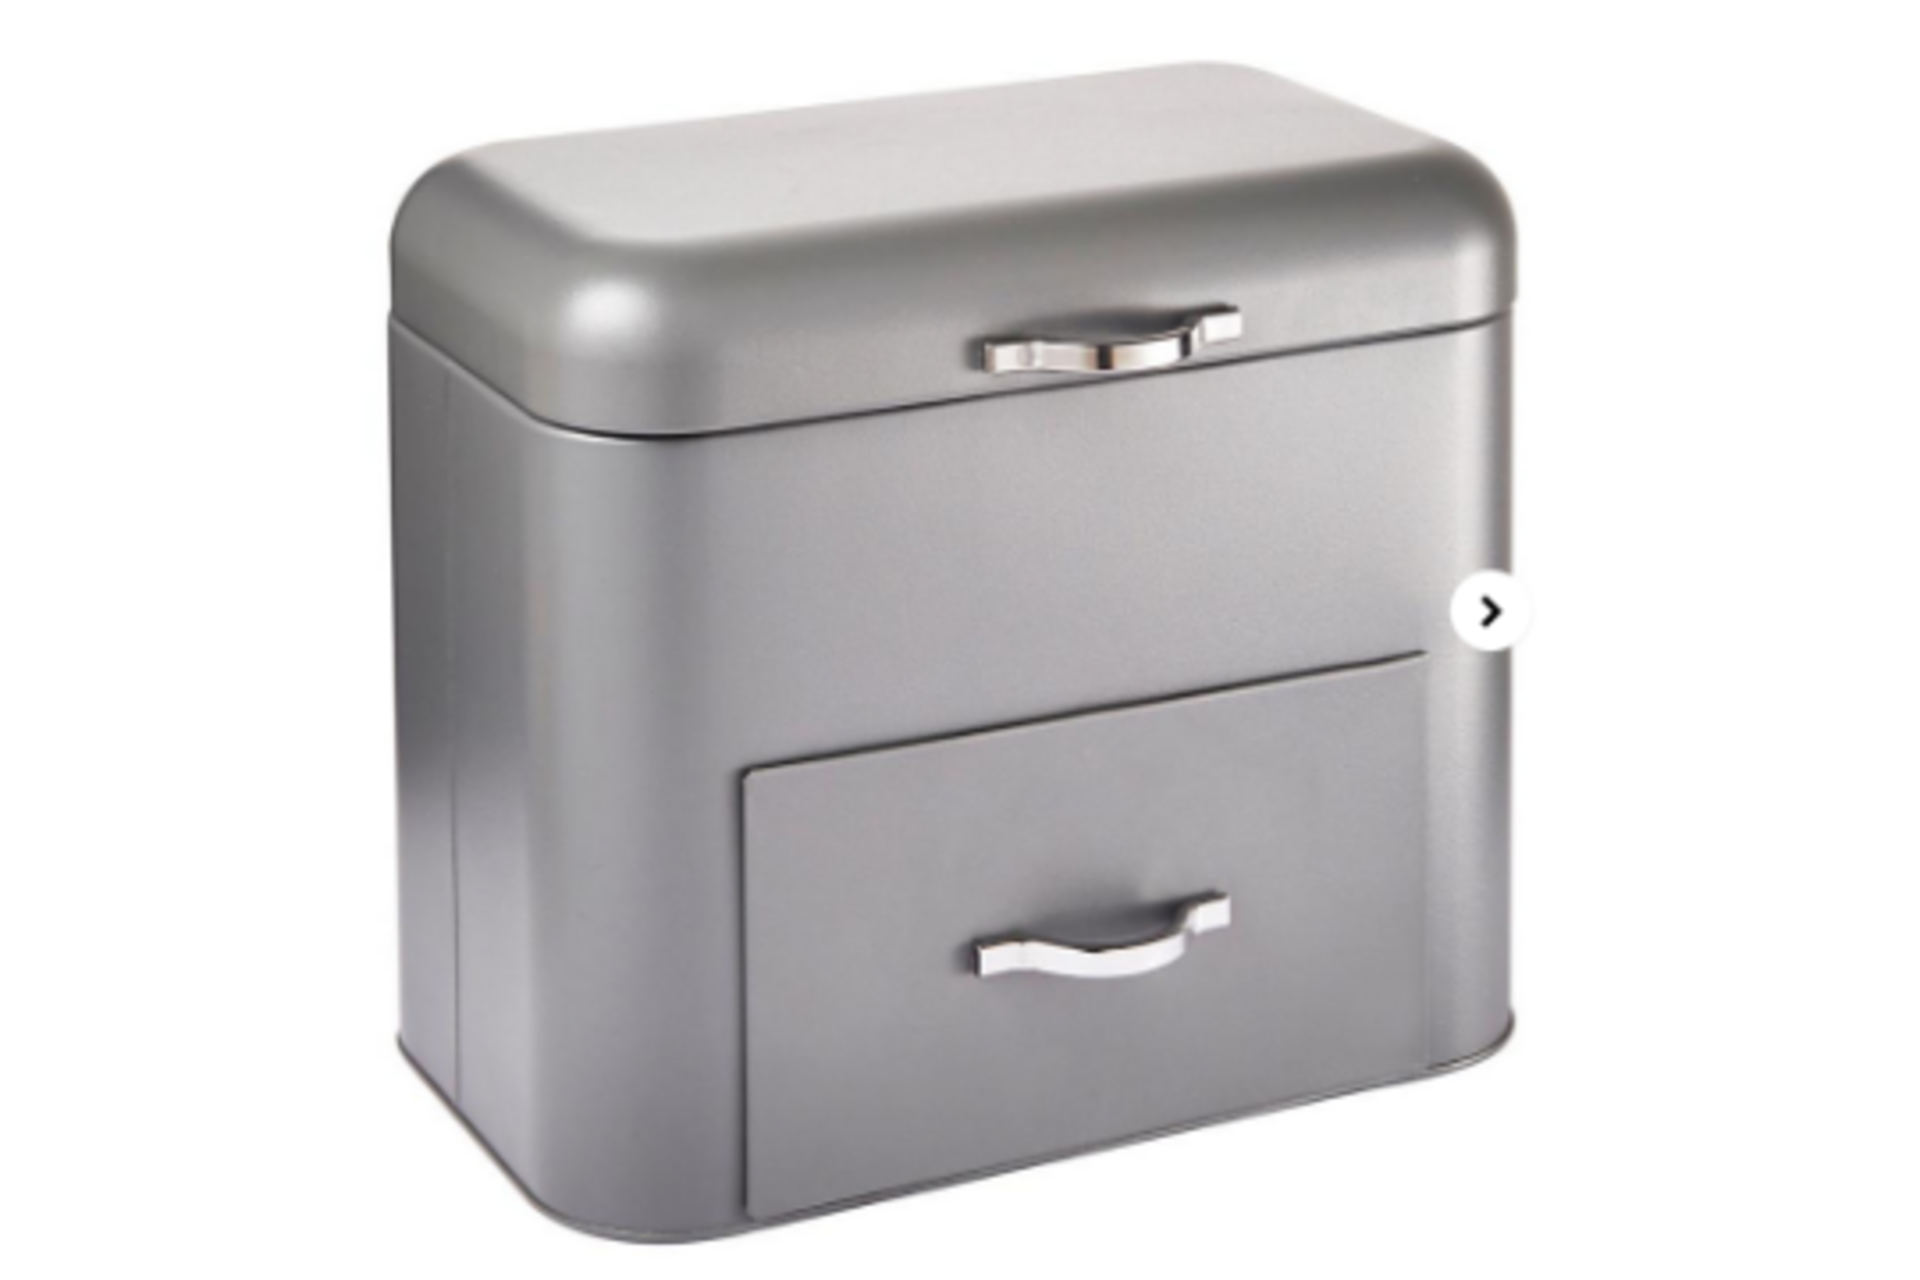 Drawer Bread Bin. - ER22. This bread bin complete with an innovative design allows you to store a